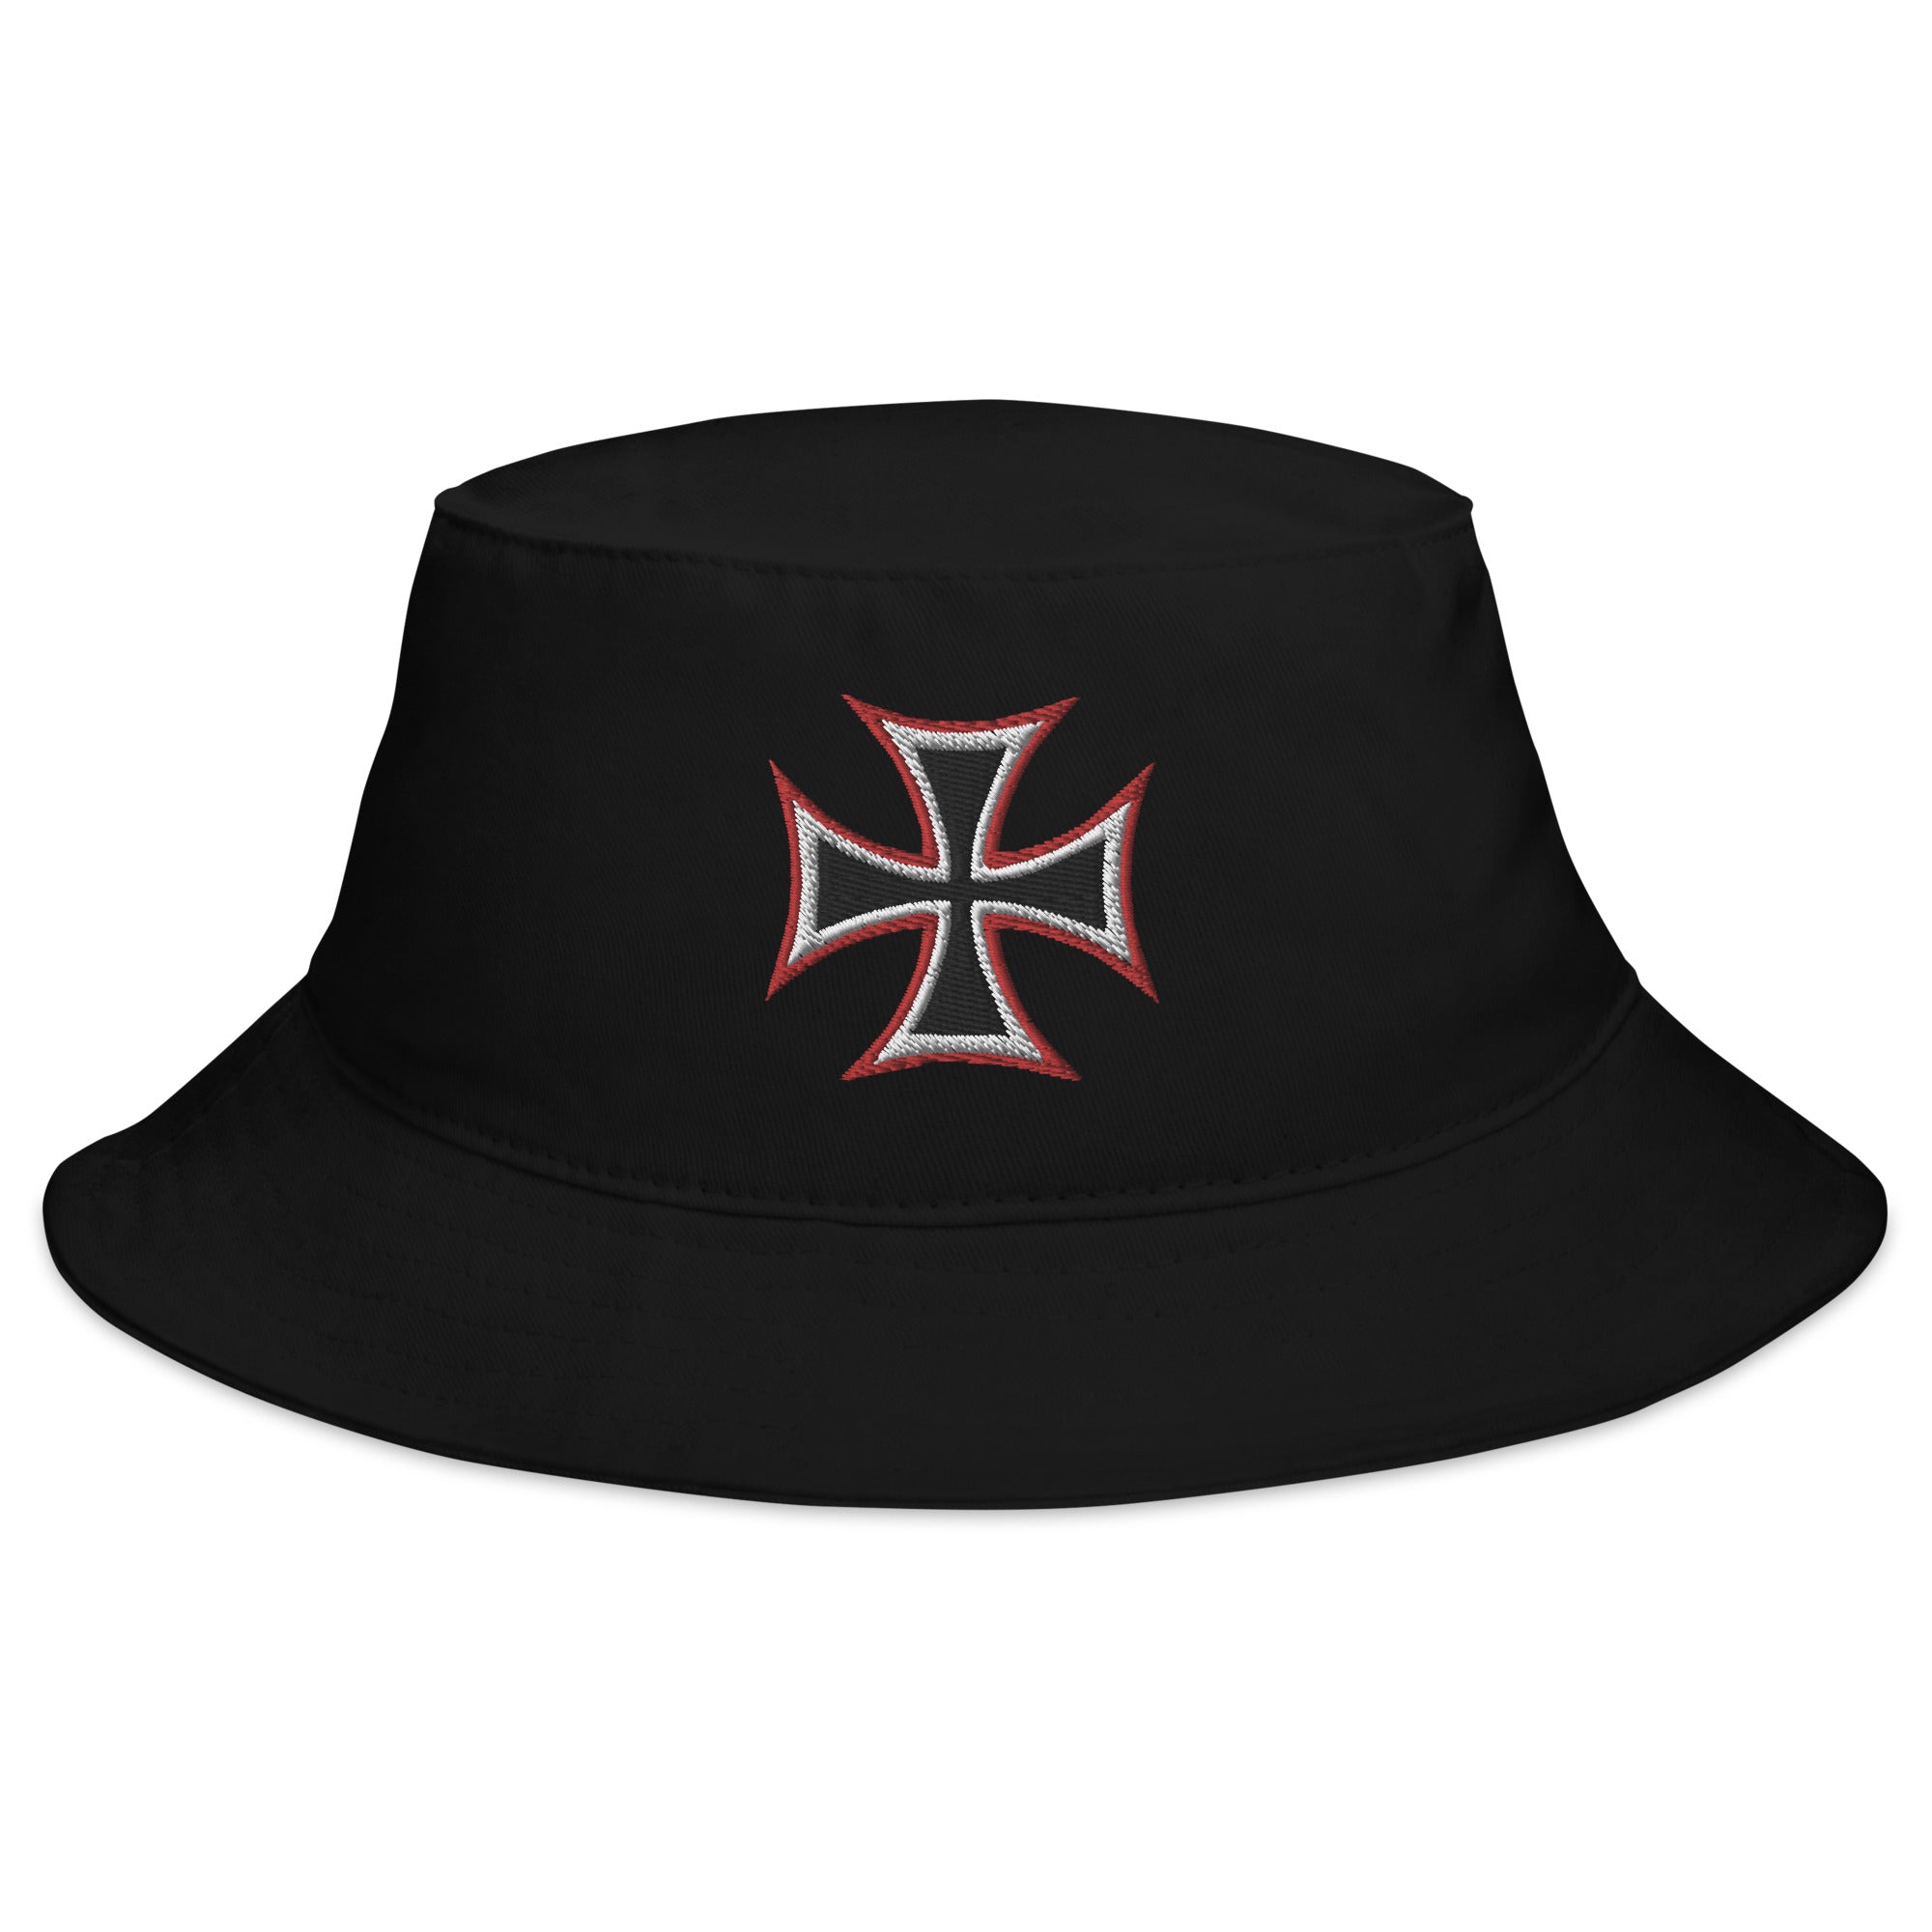 WWII Style Iron Cross Occult Symbol Embroidered Bucket Hat